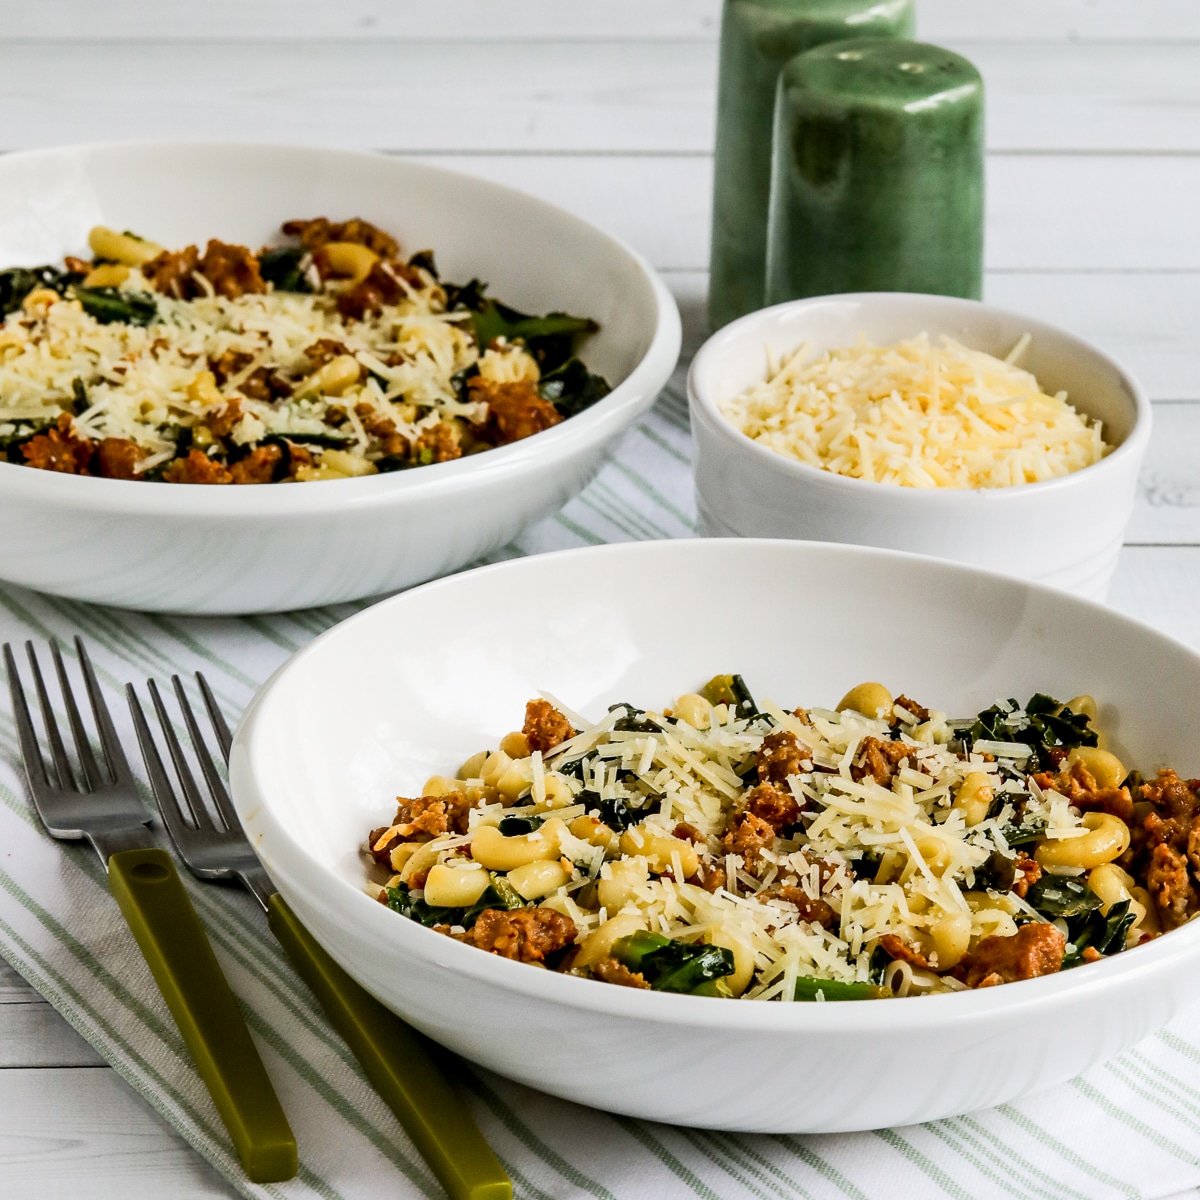 Italian Sausage Pasta with Collard Greens shown in two bowls with Parmesan cheese on the side.